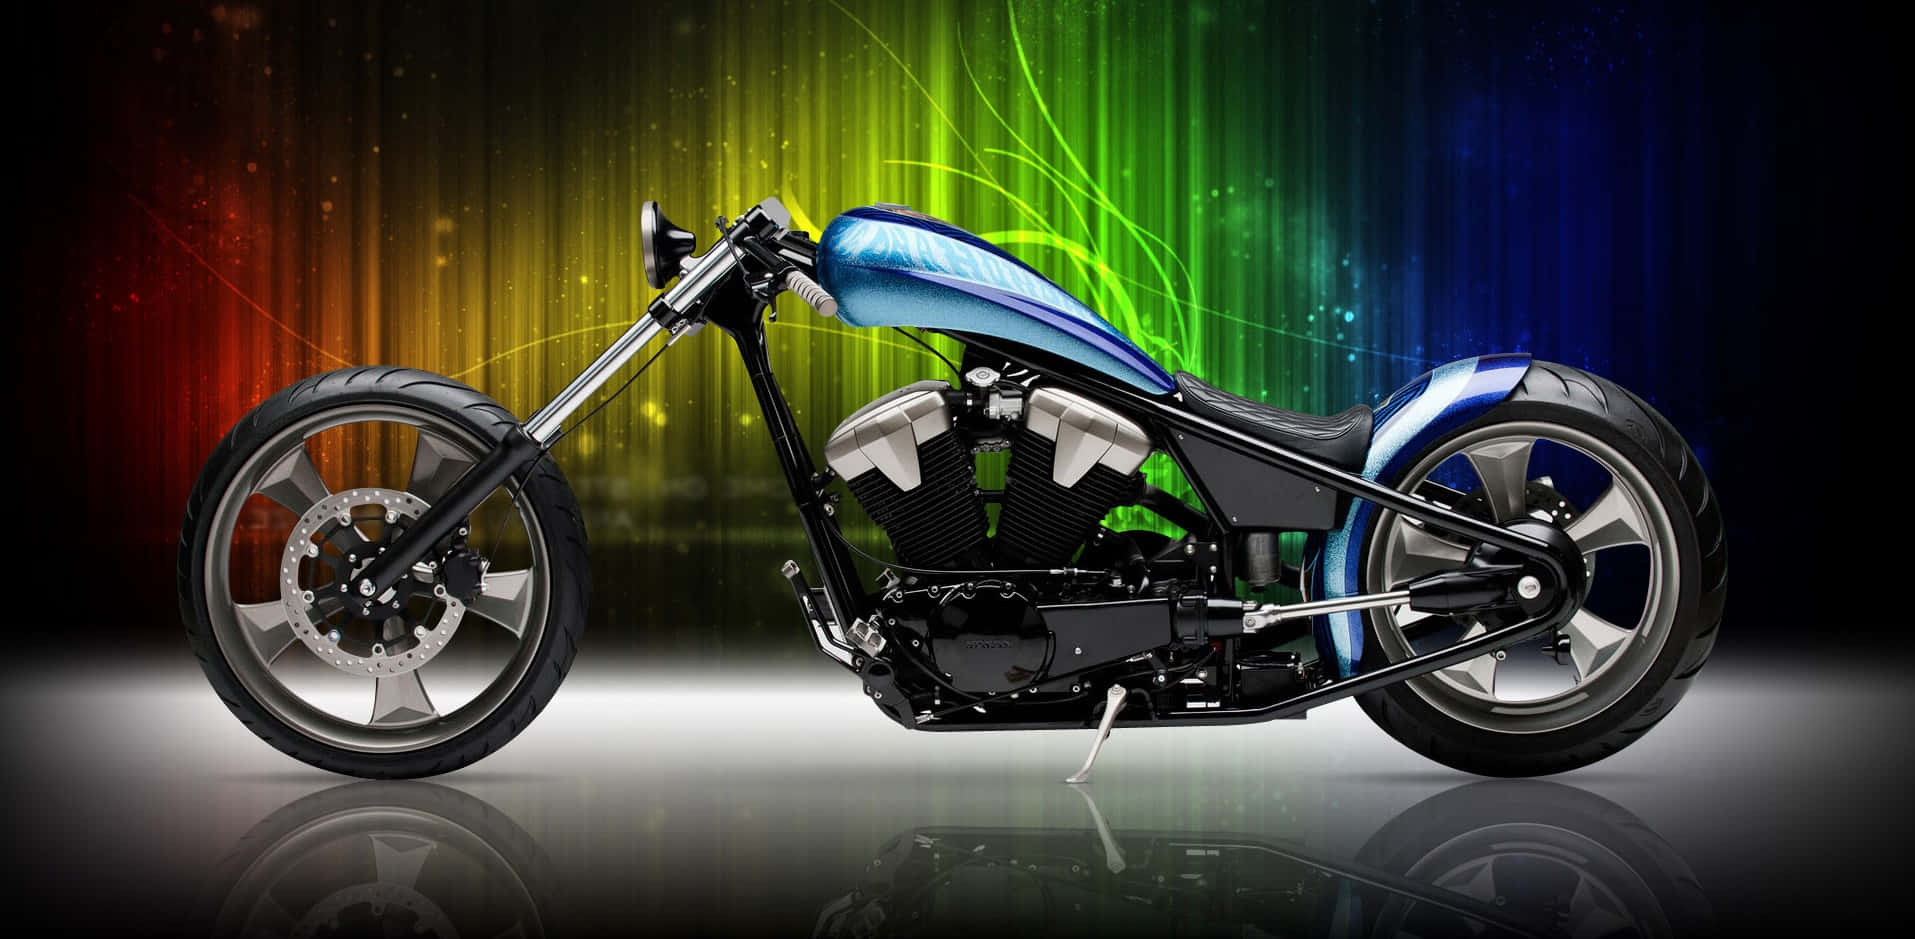 Show off your speed on a high performance HD bike